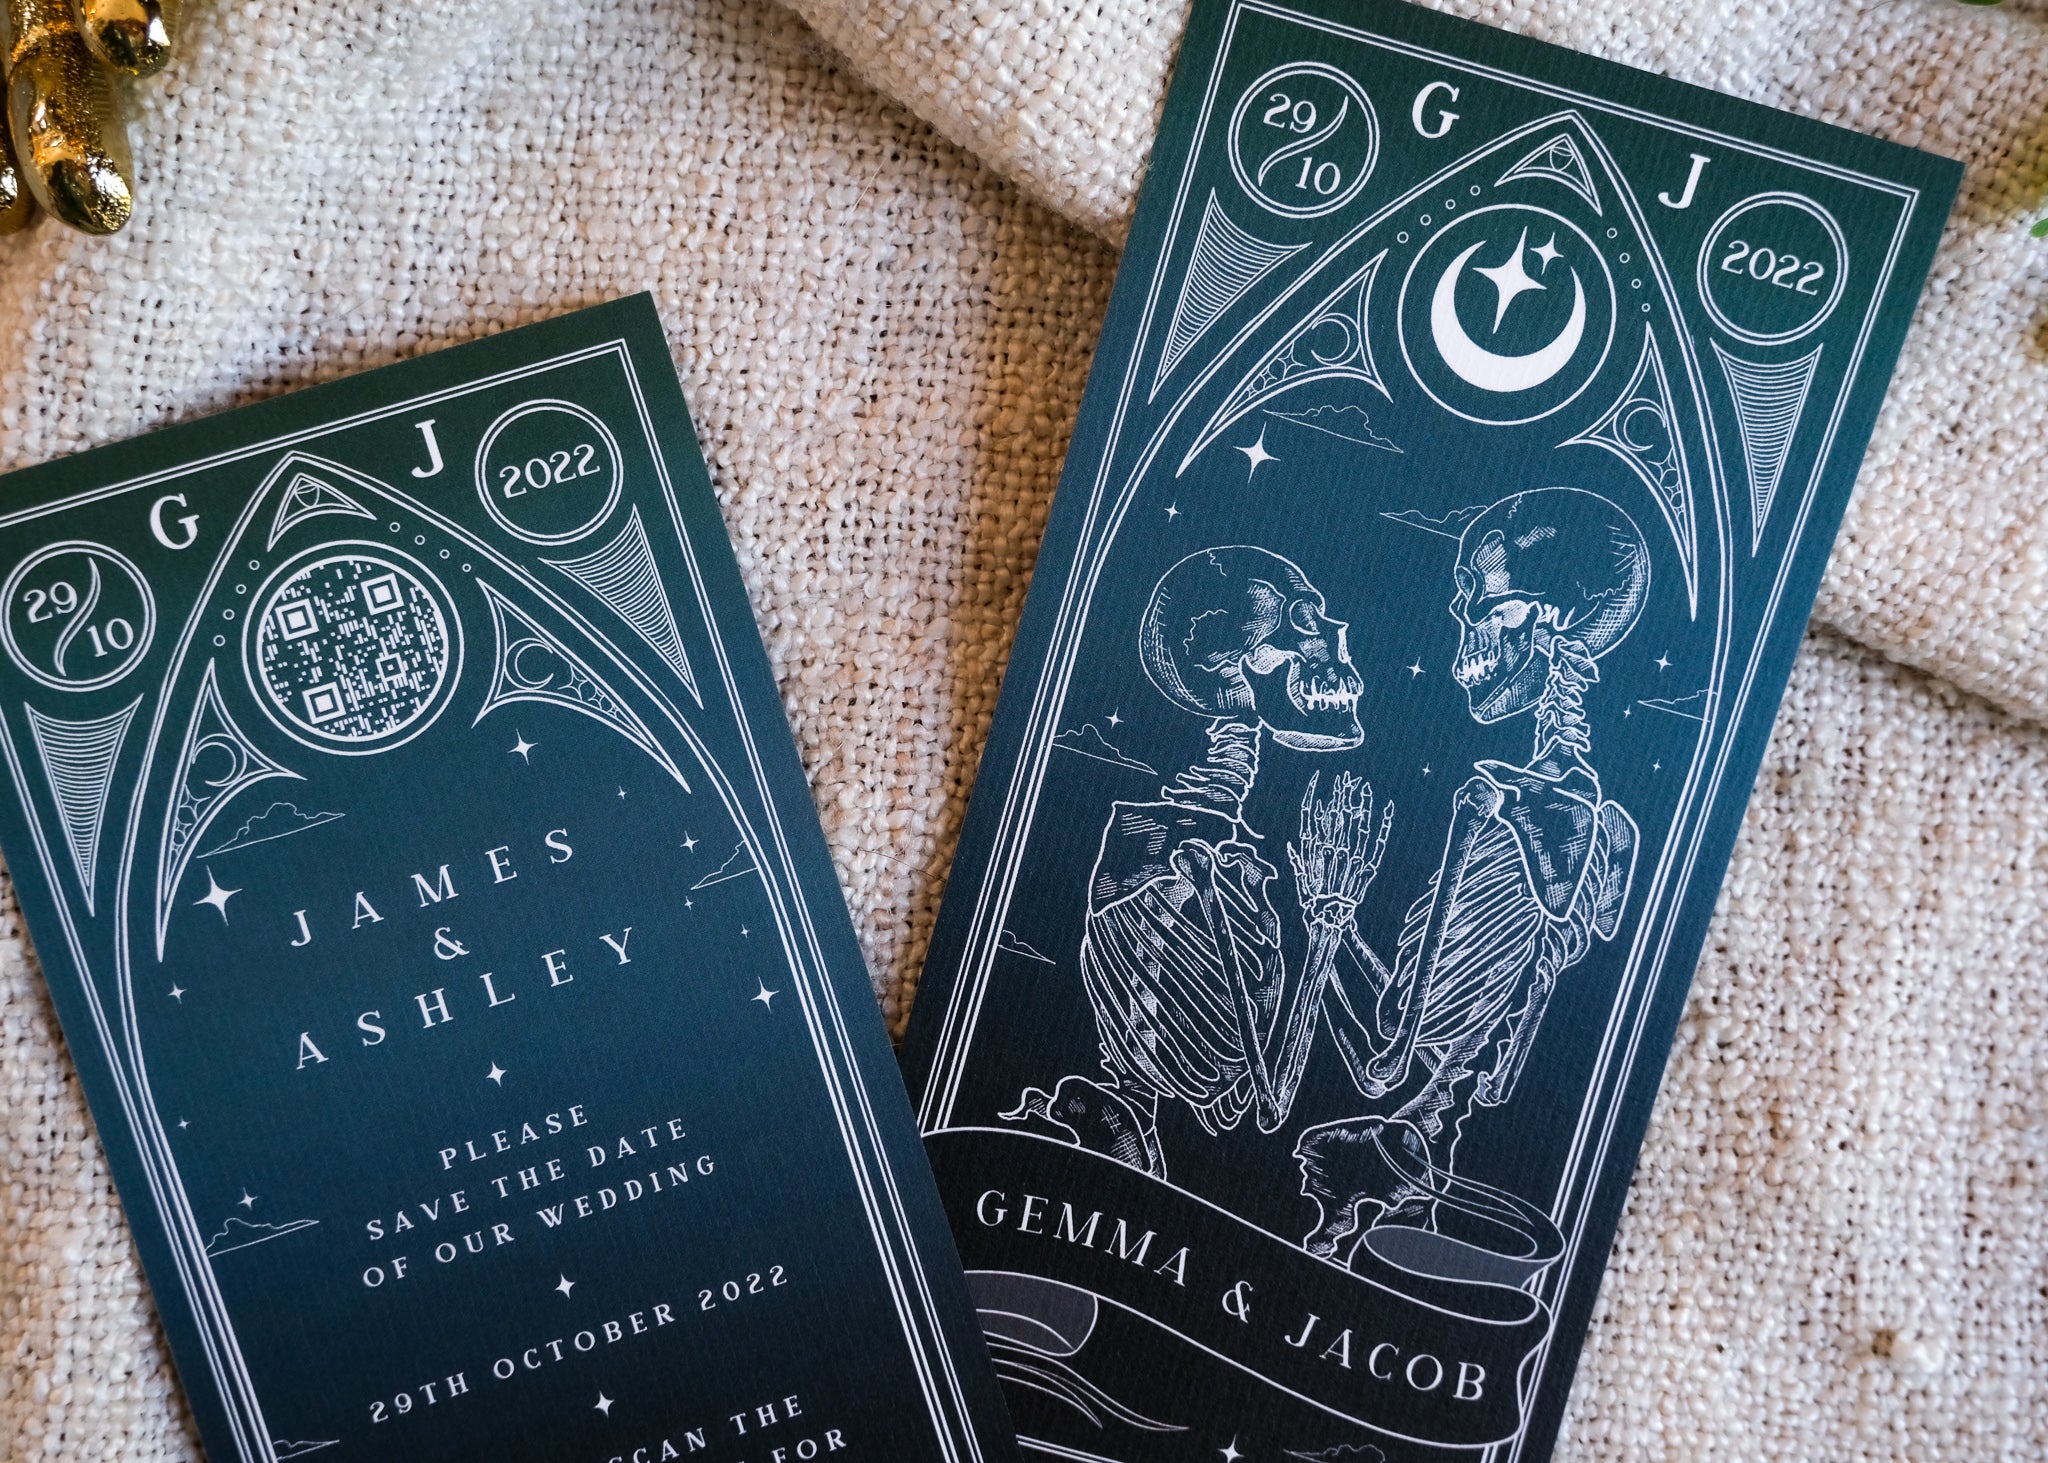 'Til Death Do Us Part' Lovers Tarot Save The Date Card